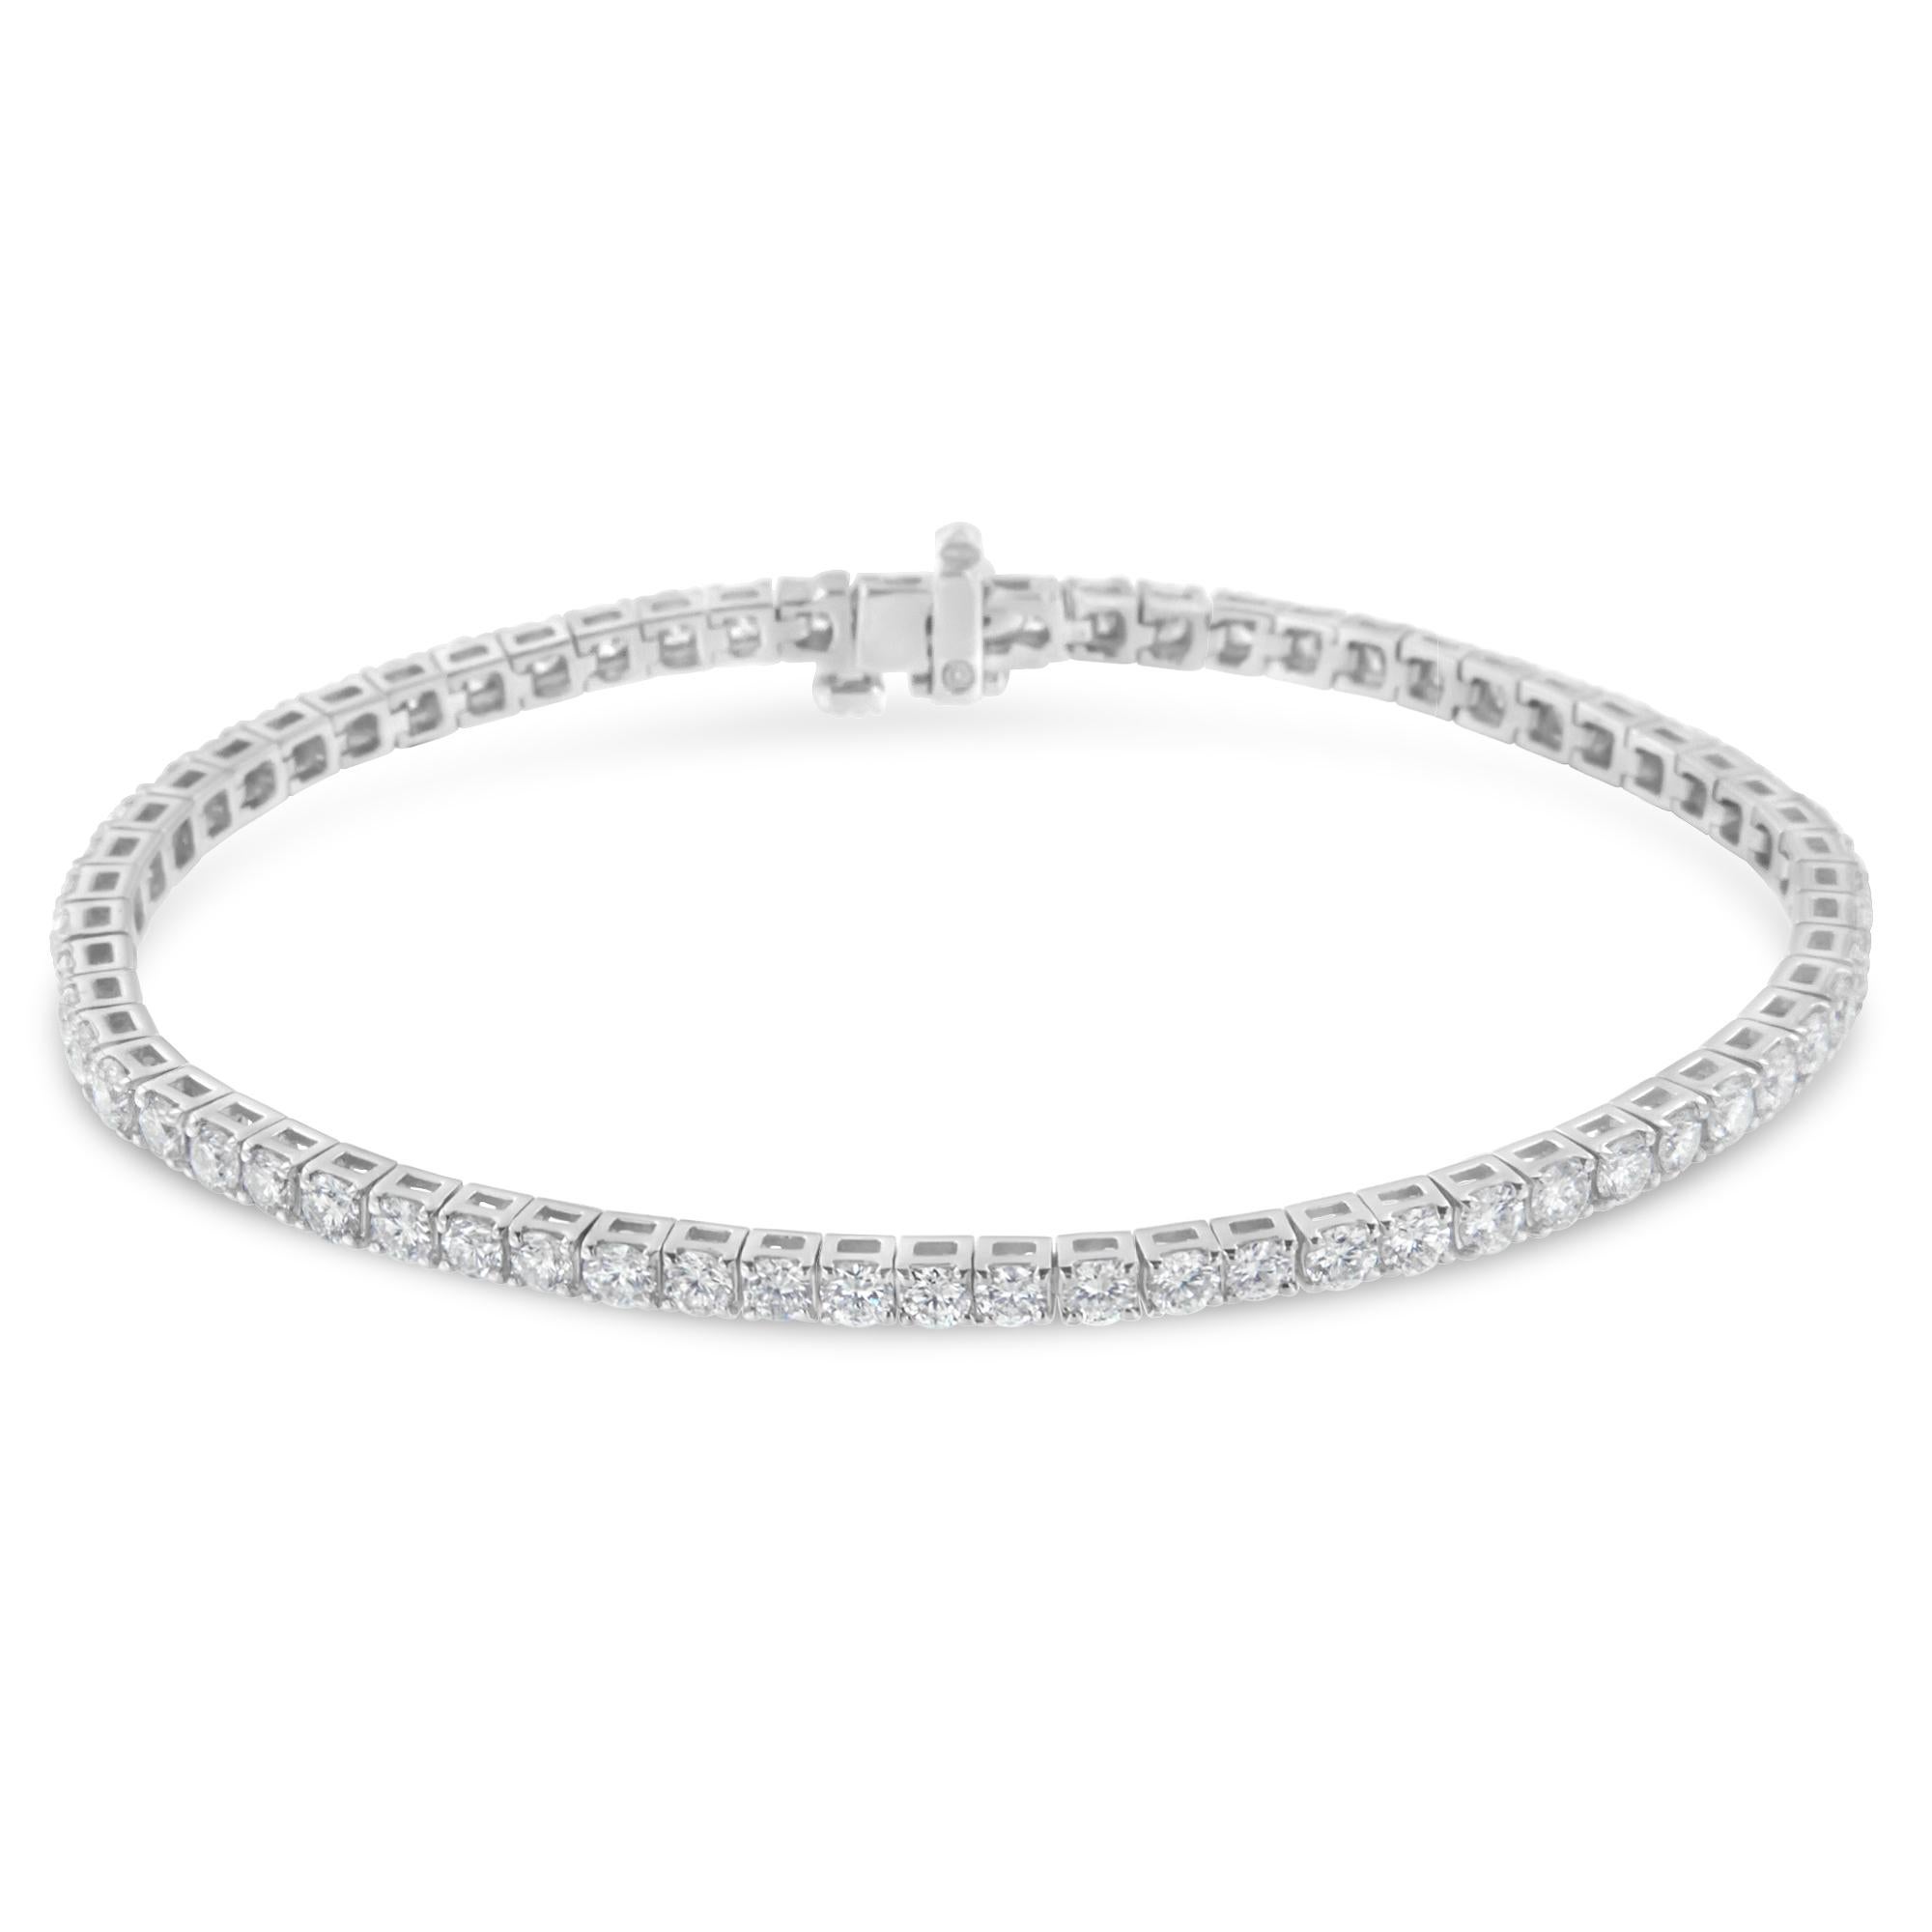 Elevate her attire with the luxe look of this magnificent diamond tennis bracelet. Elegant and timeless, this gorgeous 14K white gold bracelet features 4 carats total weight of round cut diamonds in four prong settings. The 7” bracelet fastens